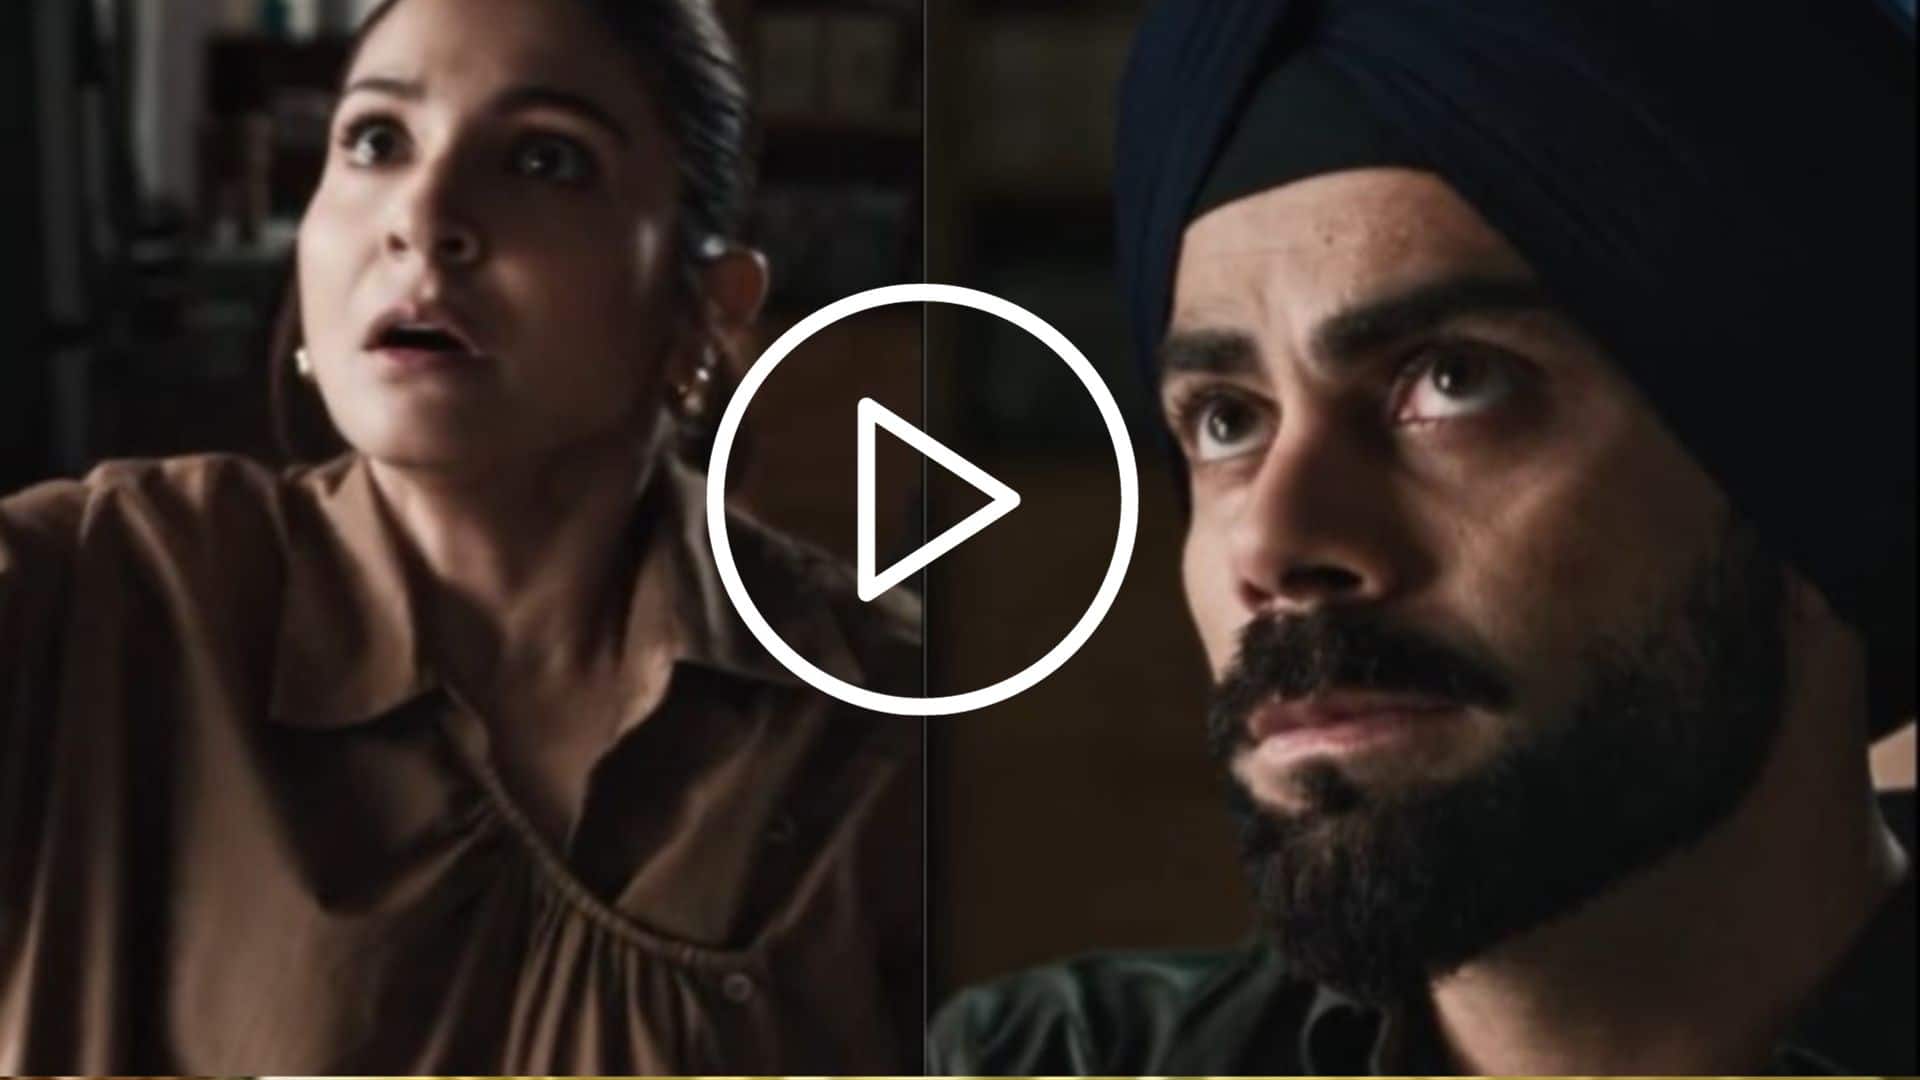 [Watch] Virat Kohli and Anushka Sharma Serve Up Scares and Laughs in Hilarious New Ad